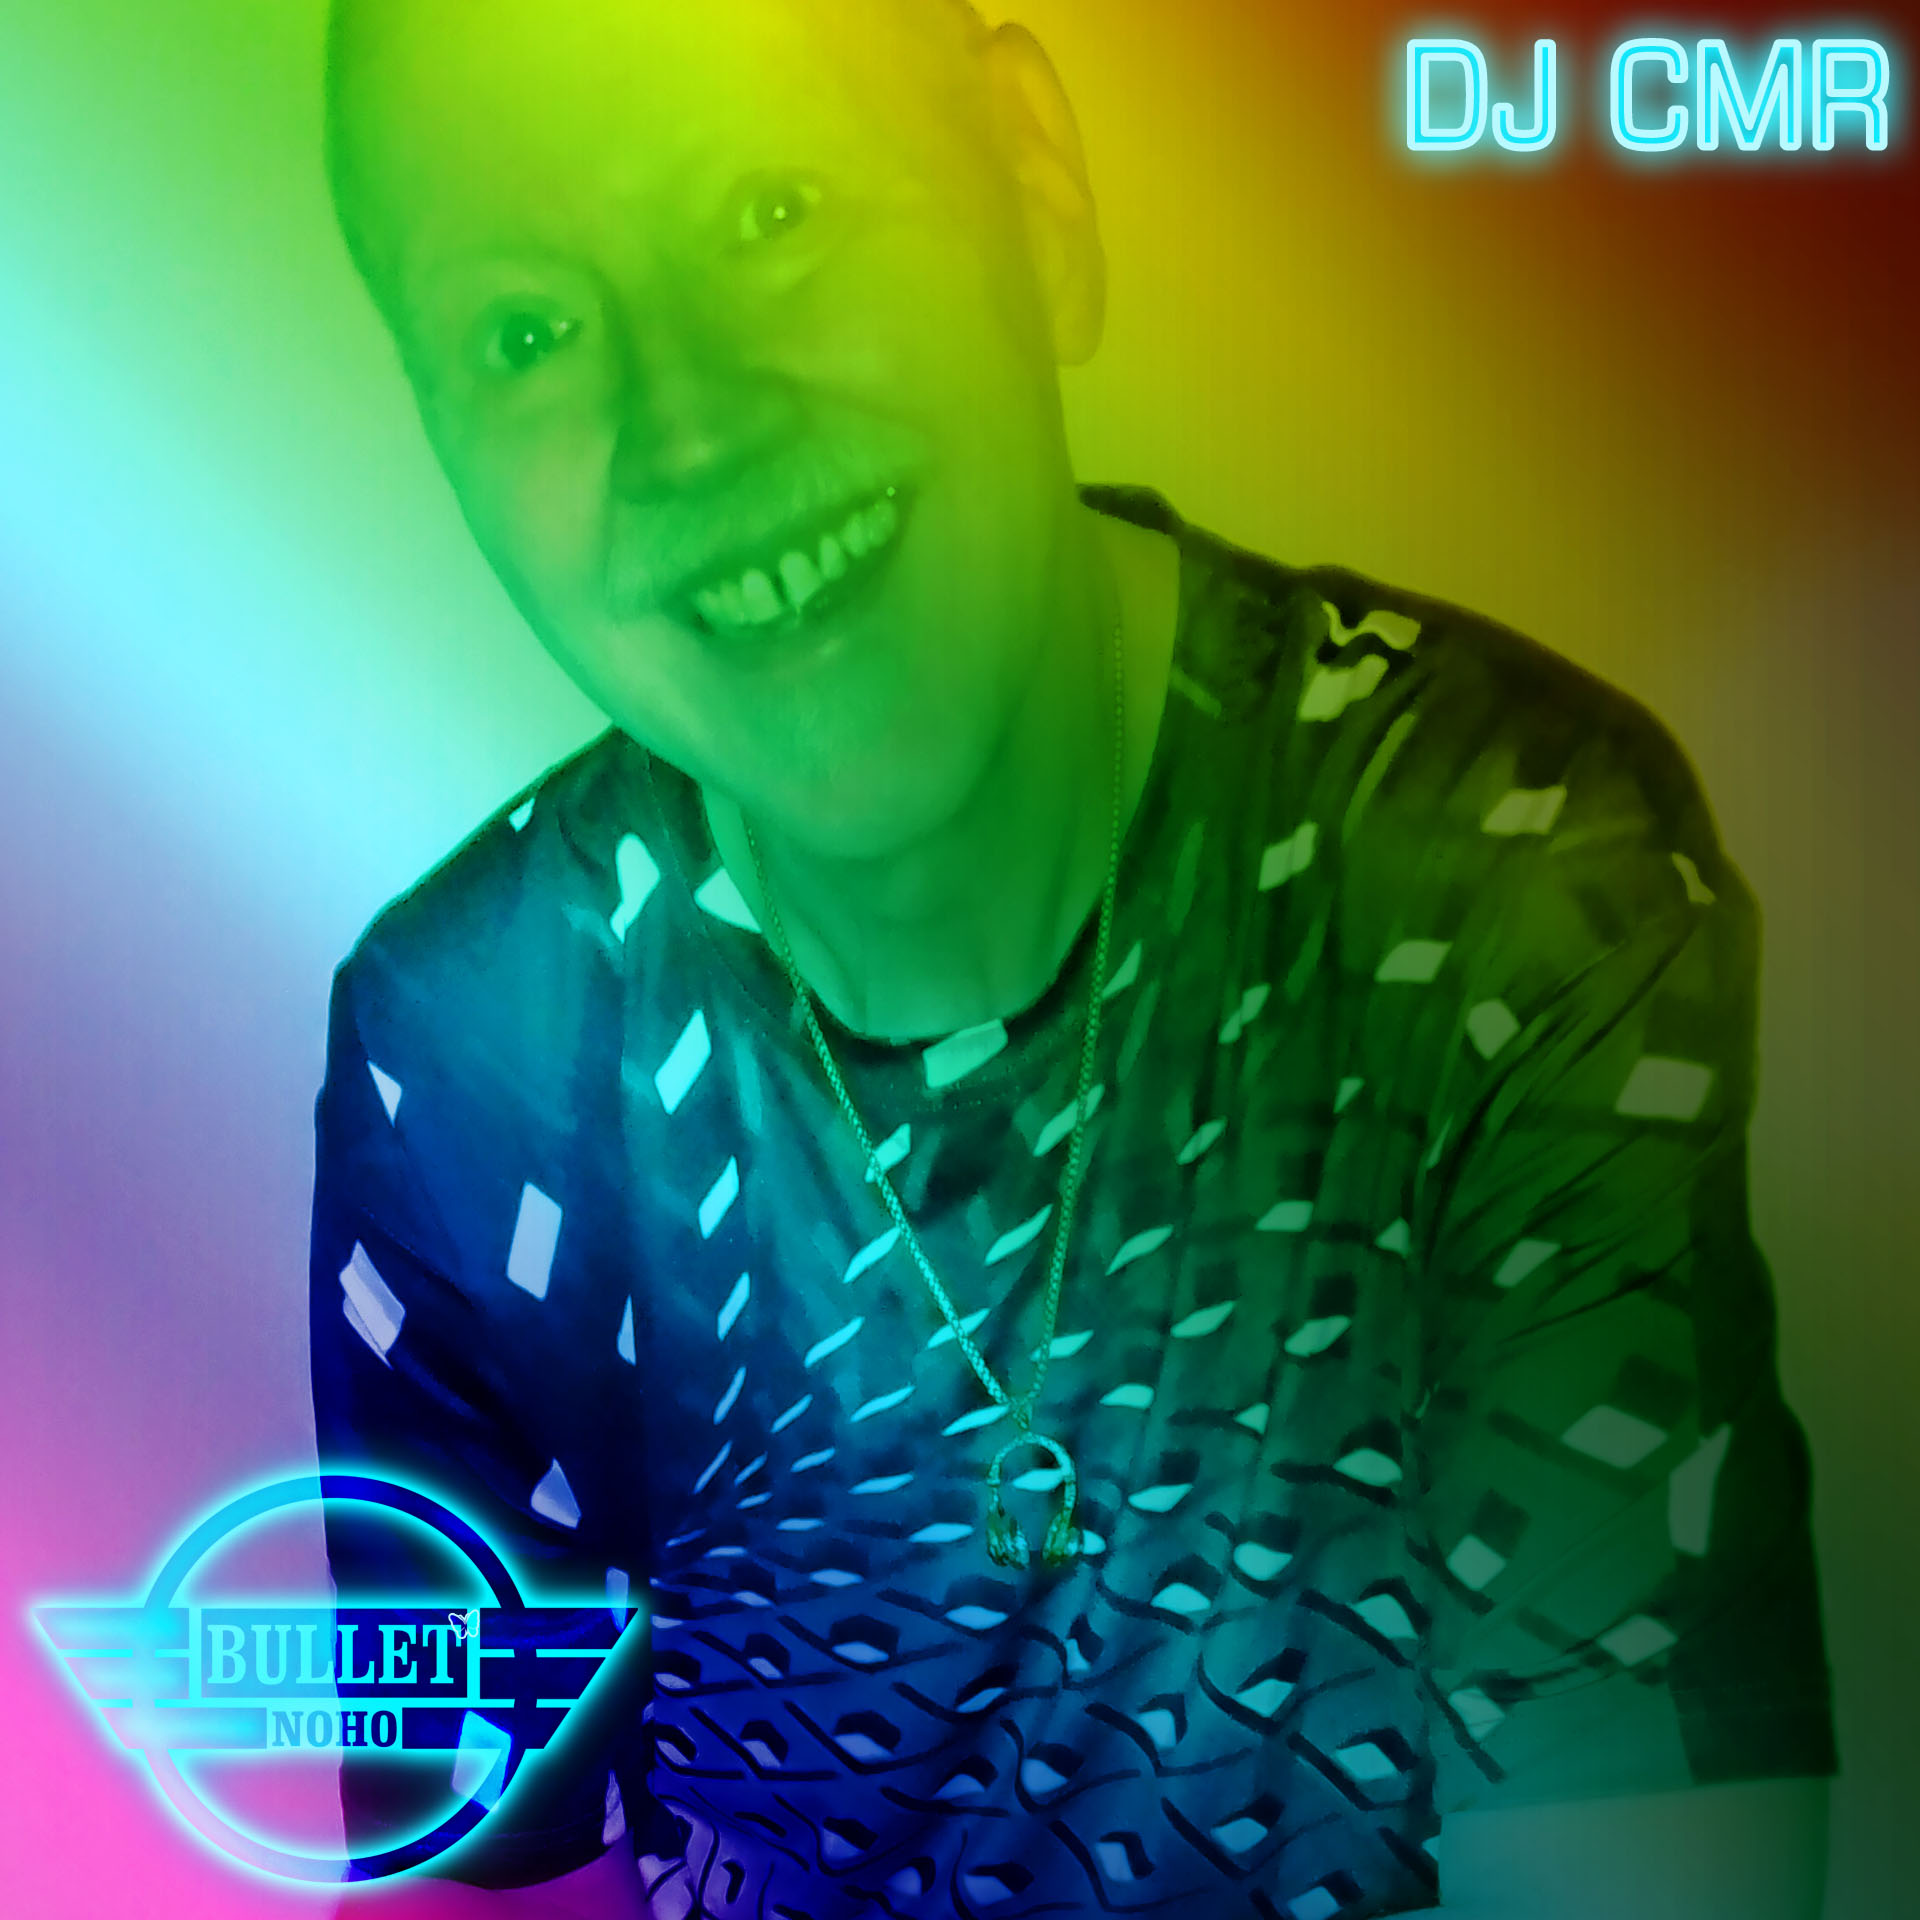 DJ CMR: Friday, September 24, 2021 from 8:00 PM to 2:00 AM